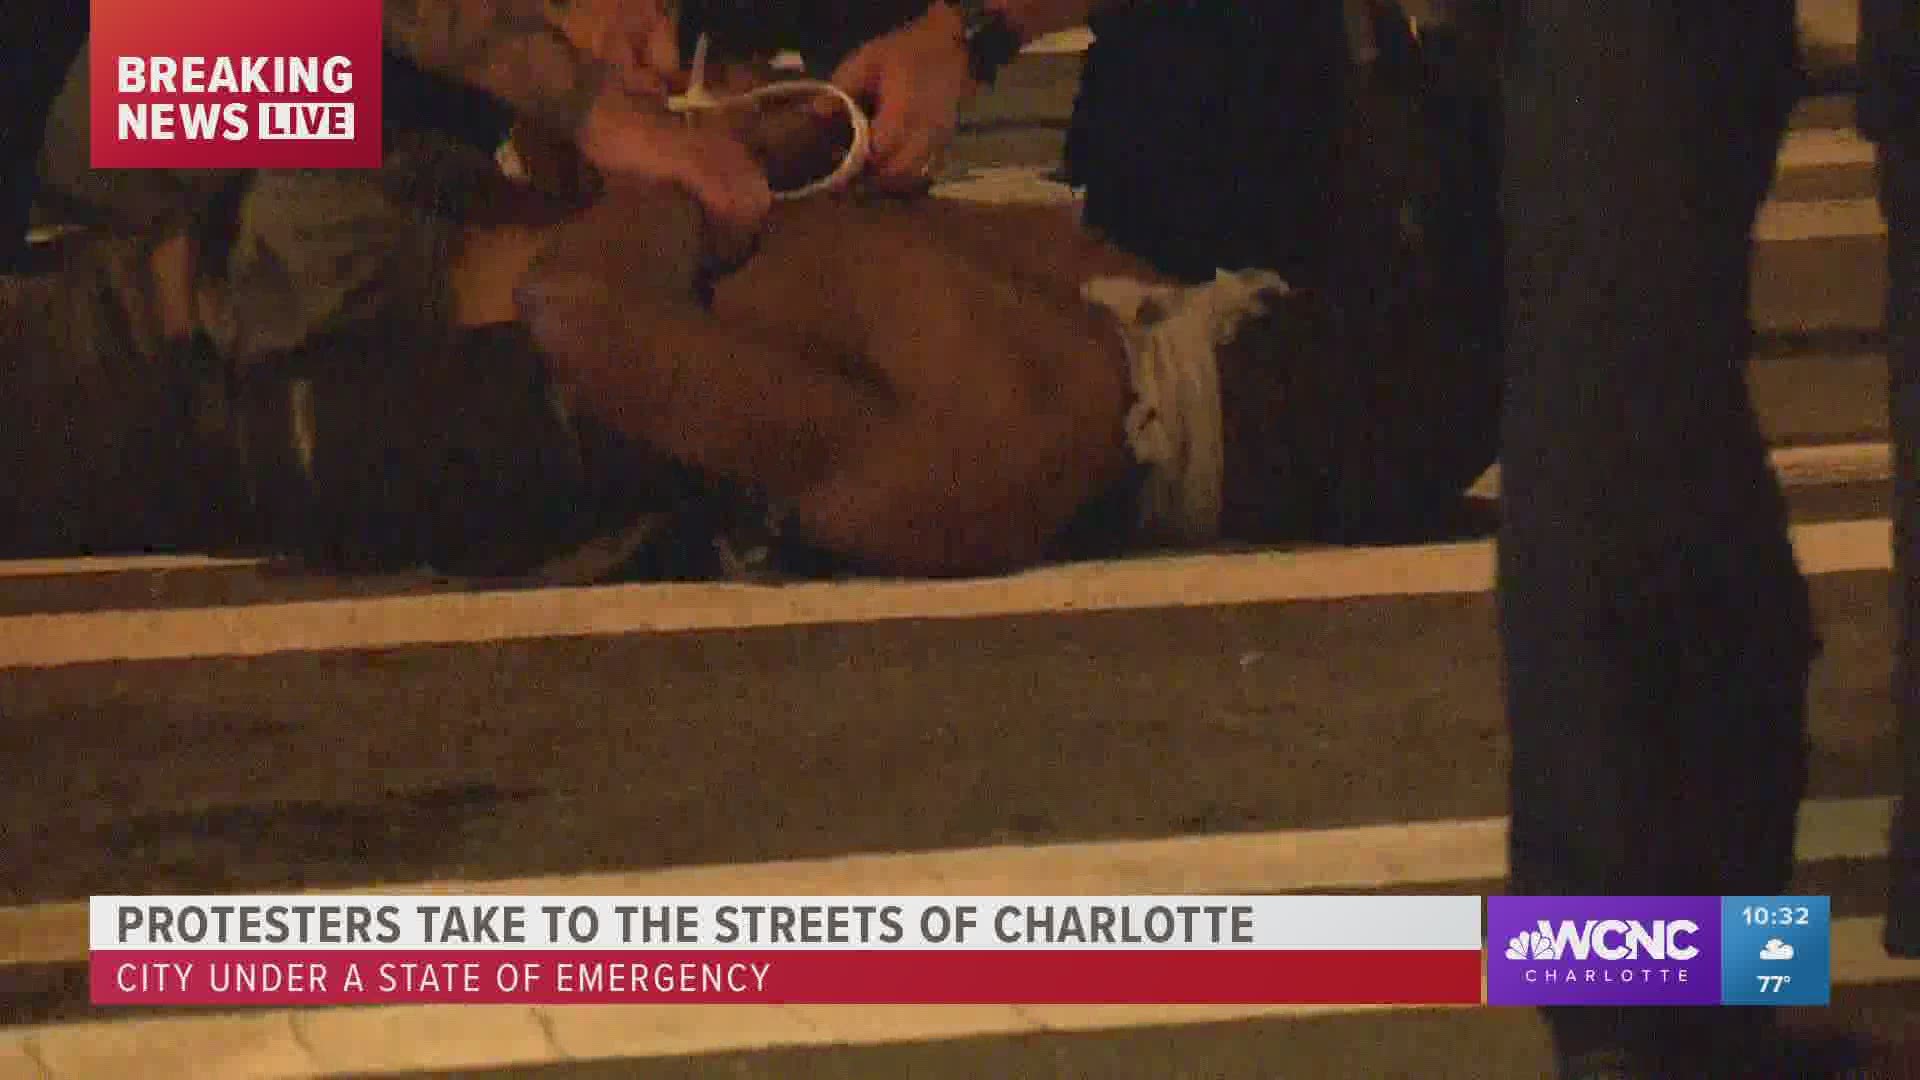 At least three people have been detained during protests in uptown Charlotte Saturday night, the Charlotte Mecklenburg Police Department confirmed.